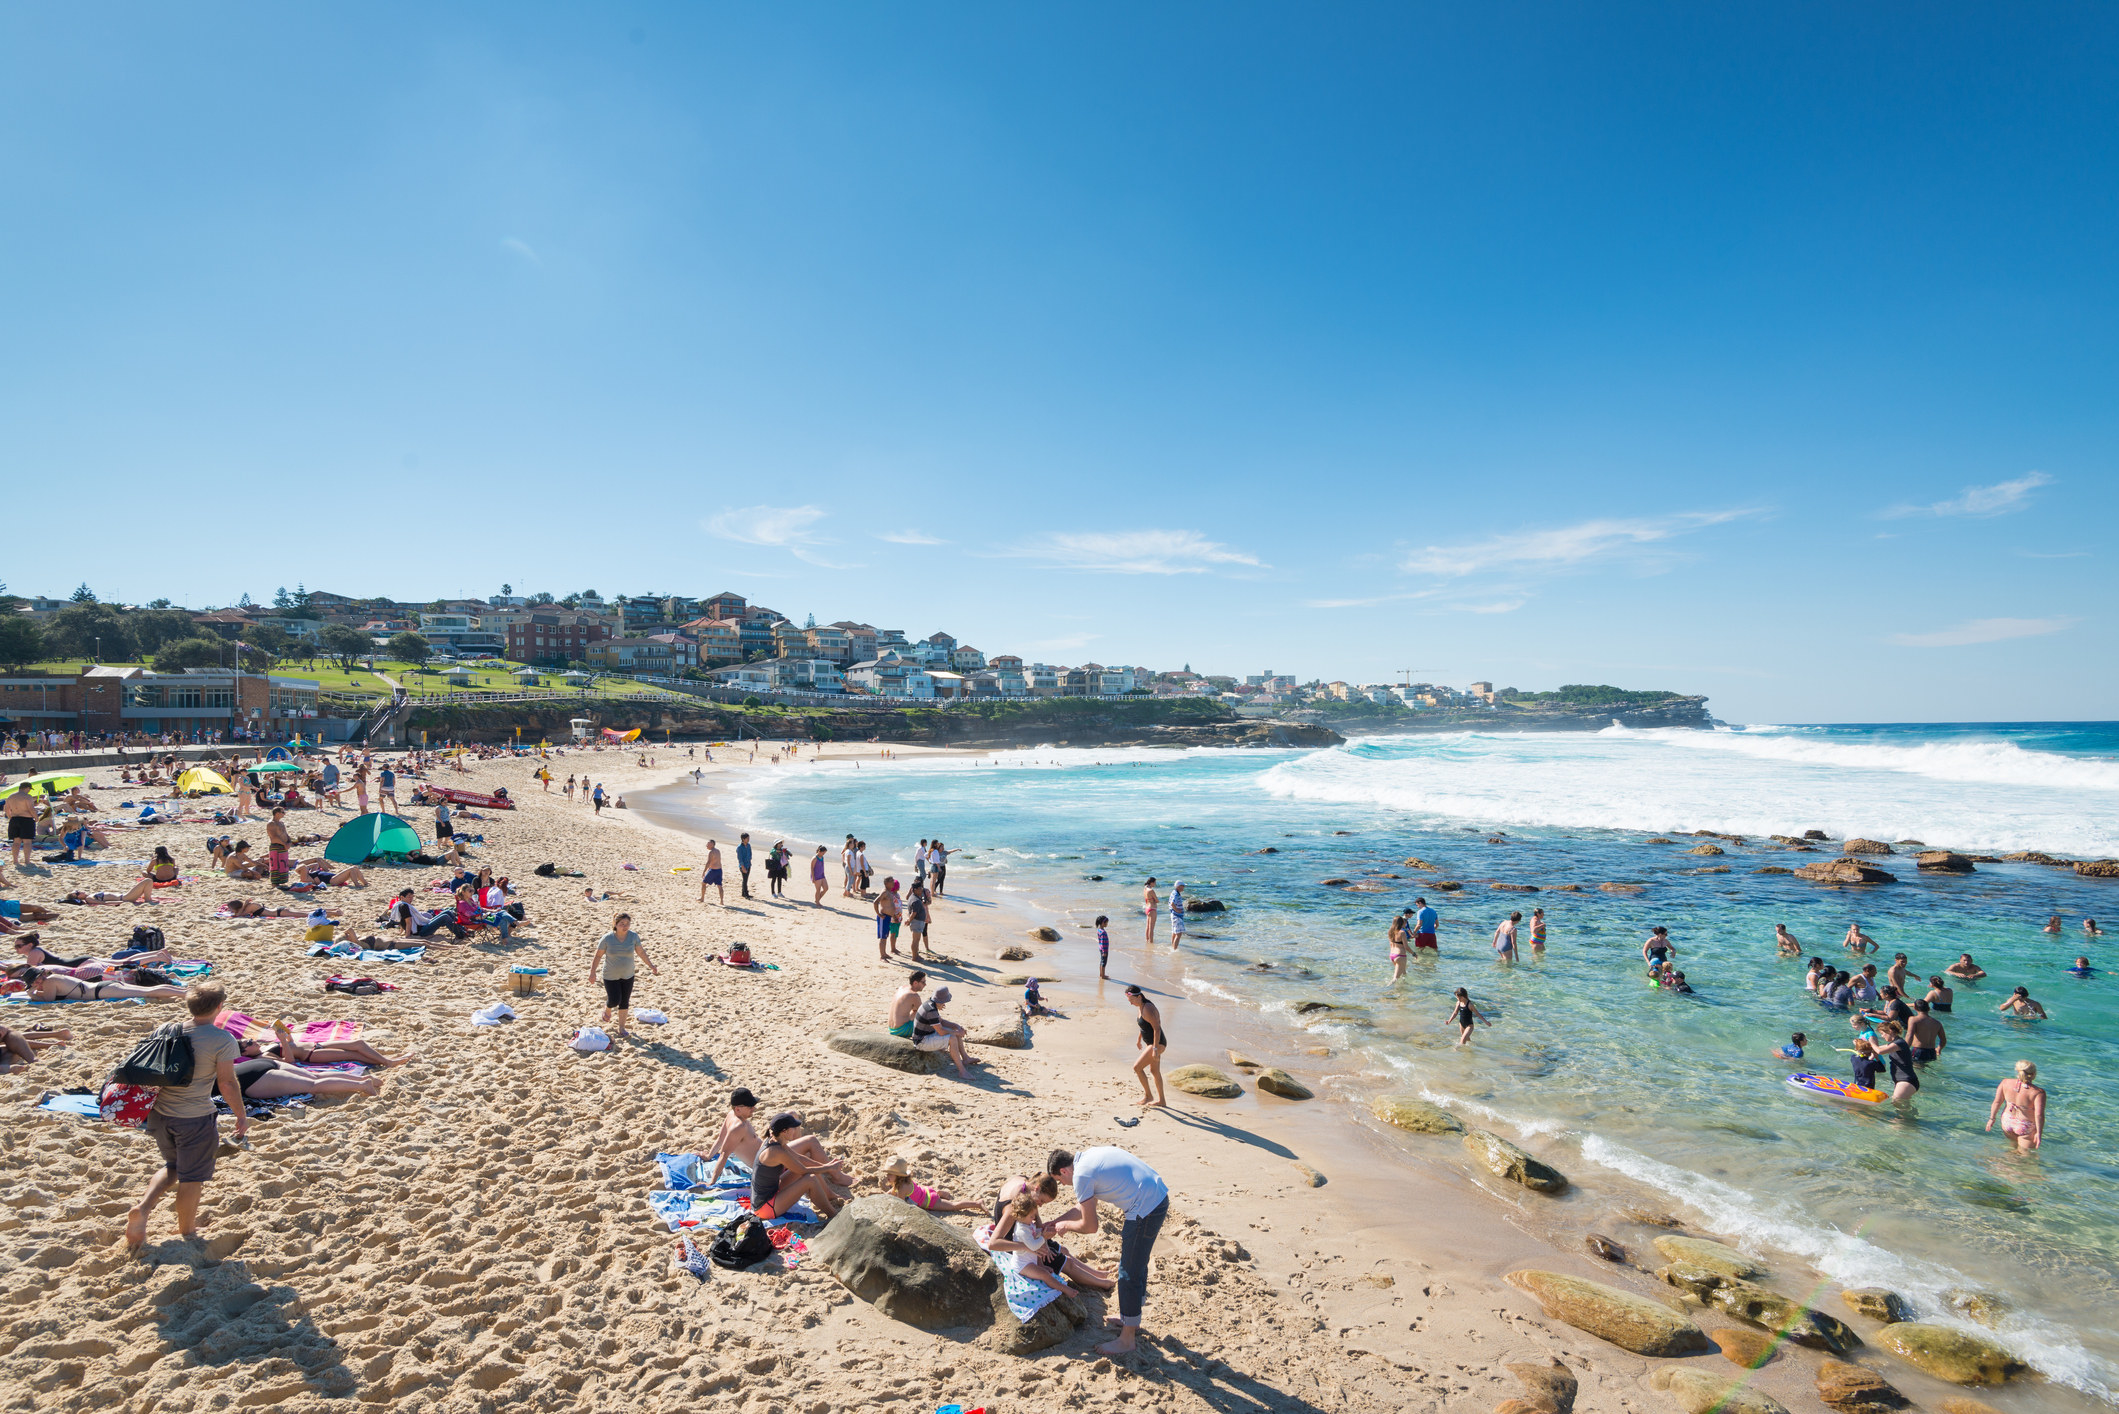 People swimming at Bronte Beach in Australia.